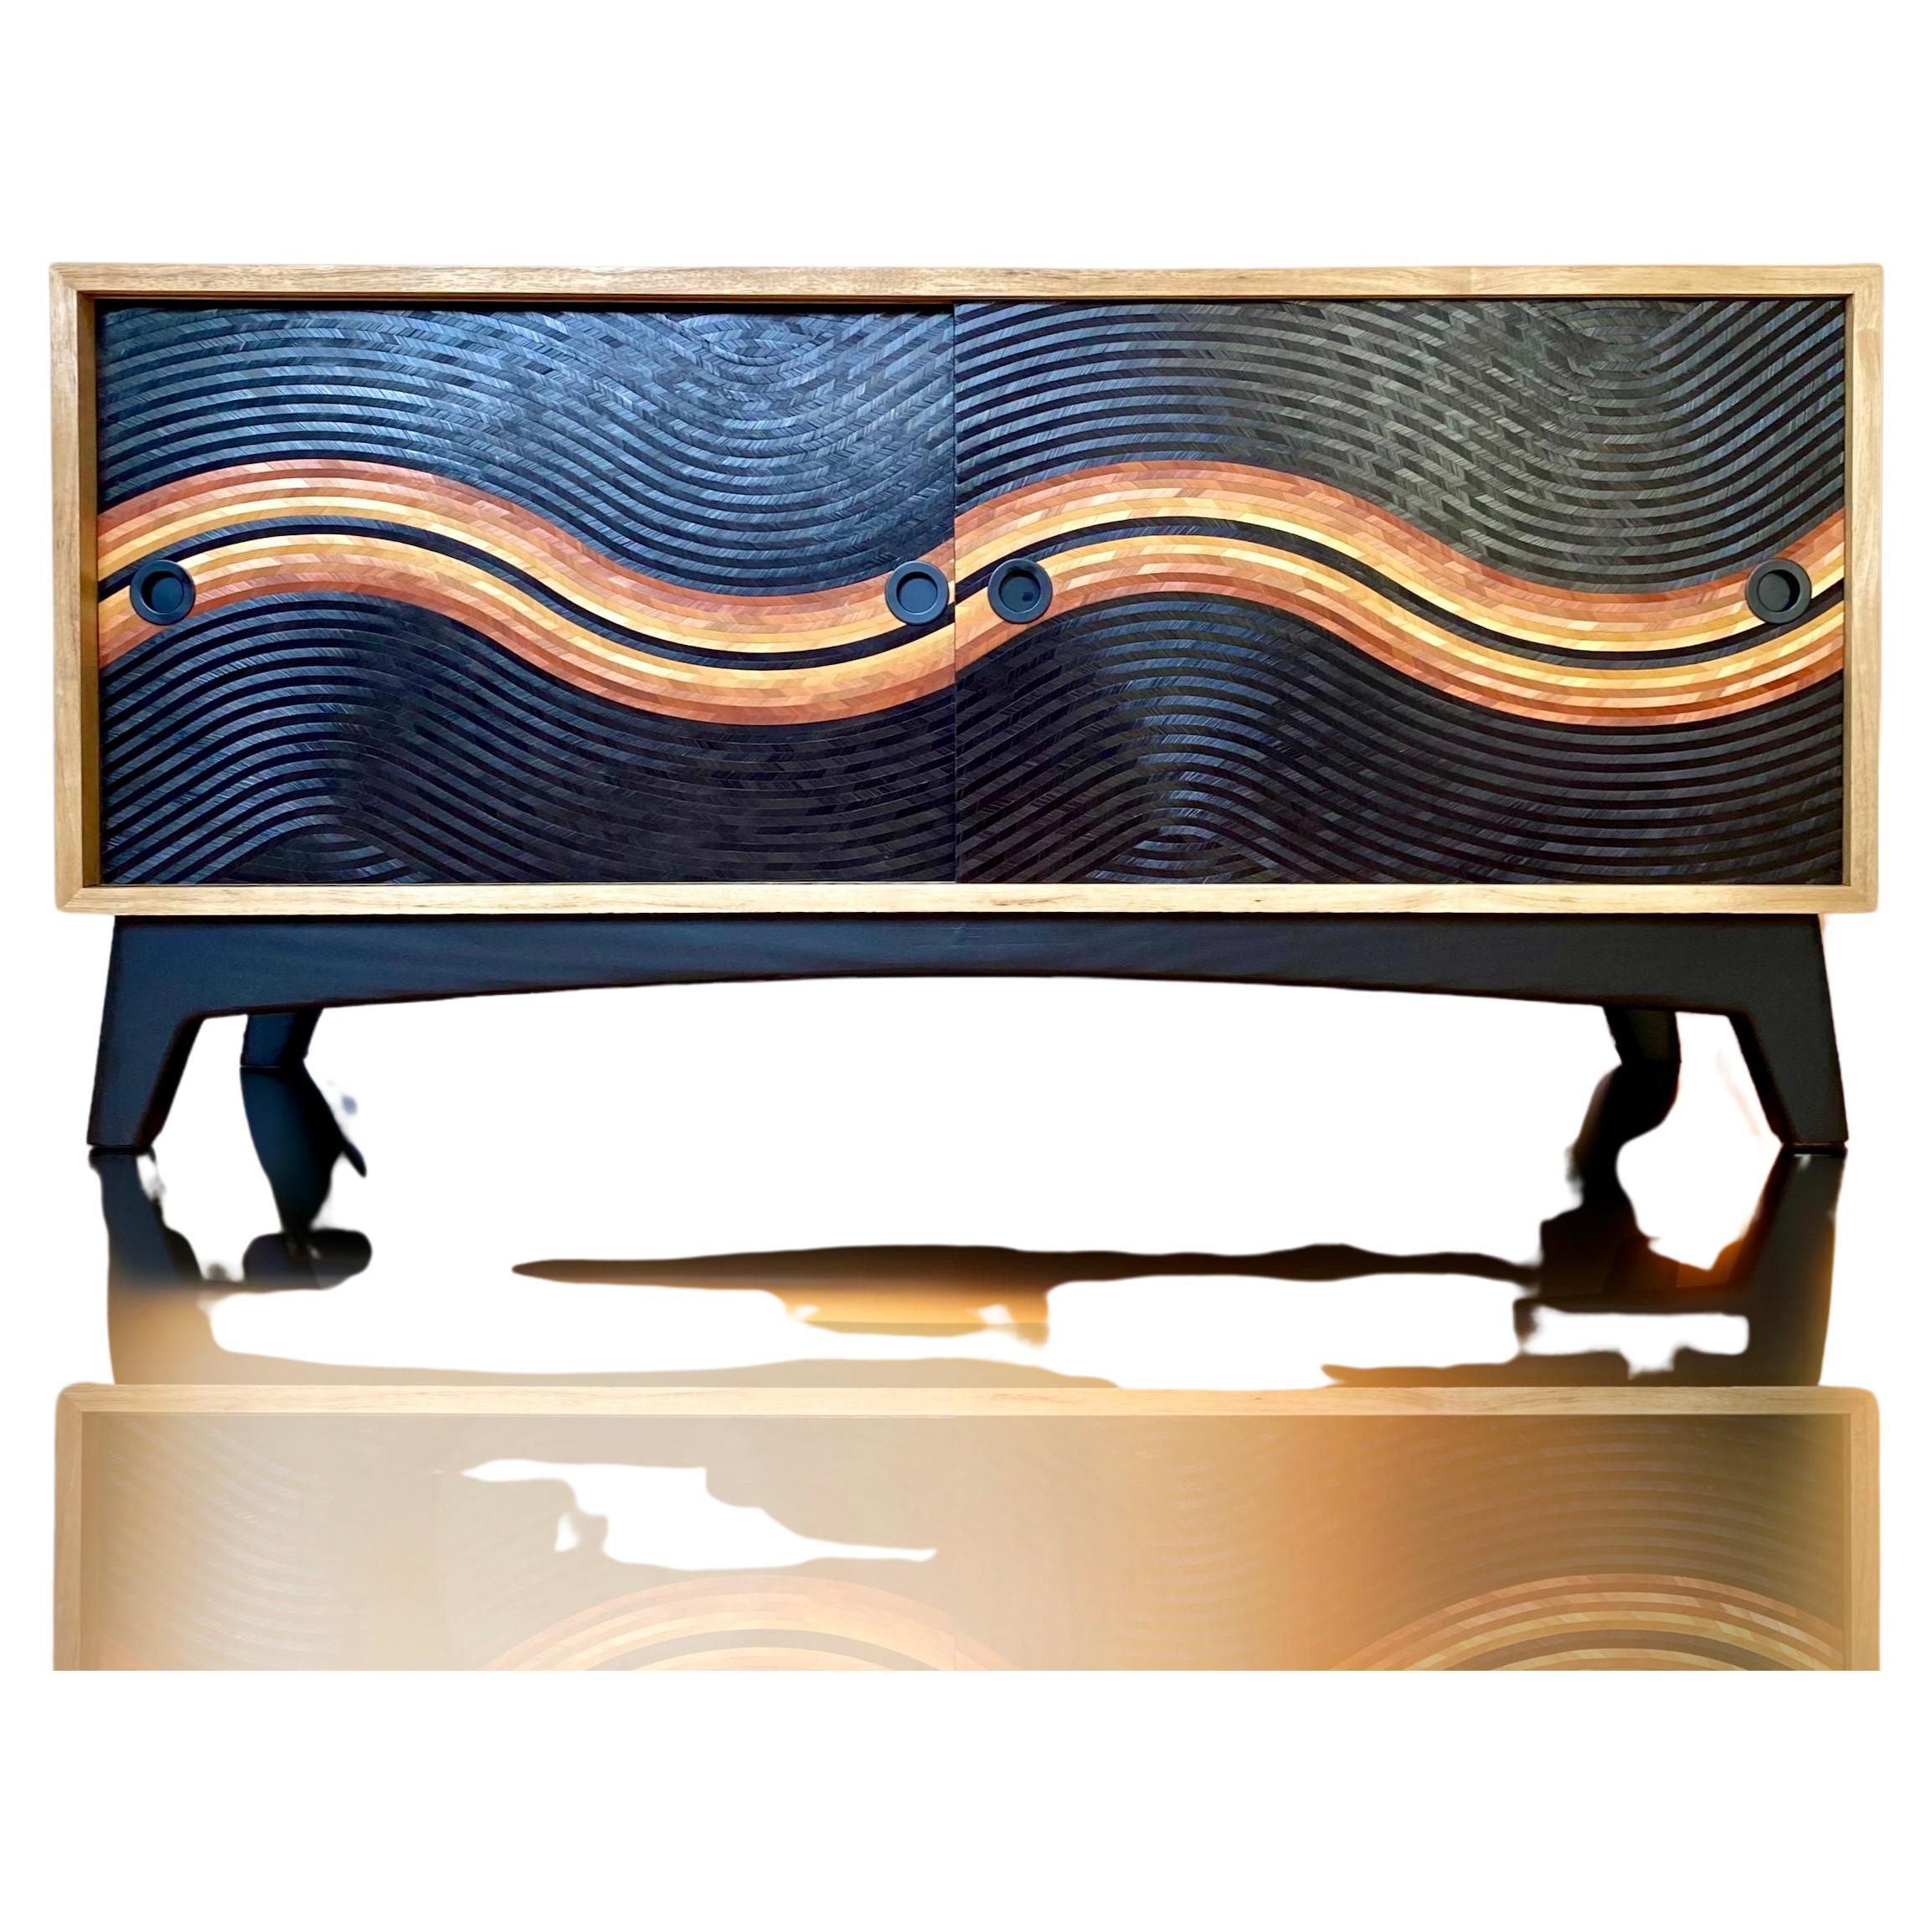 This sideboard offers two beautiful storage spaces for your vinyl records but can perfectly accommodate crockery or any other everyday objects.
Thanks to its sliding doors, its size remains optimal.

The box is worked with an exotic wood species,